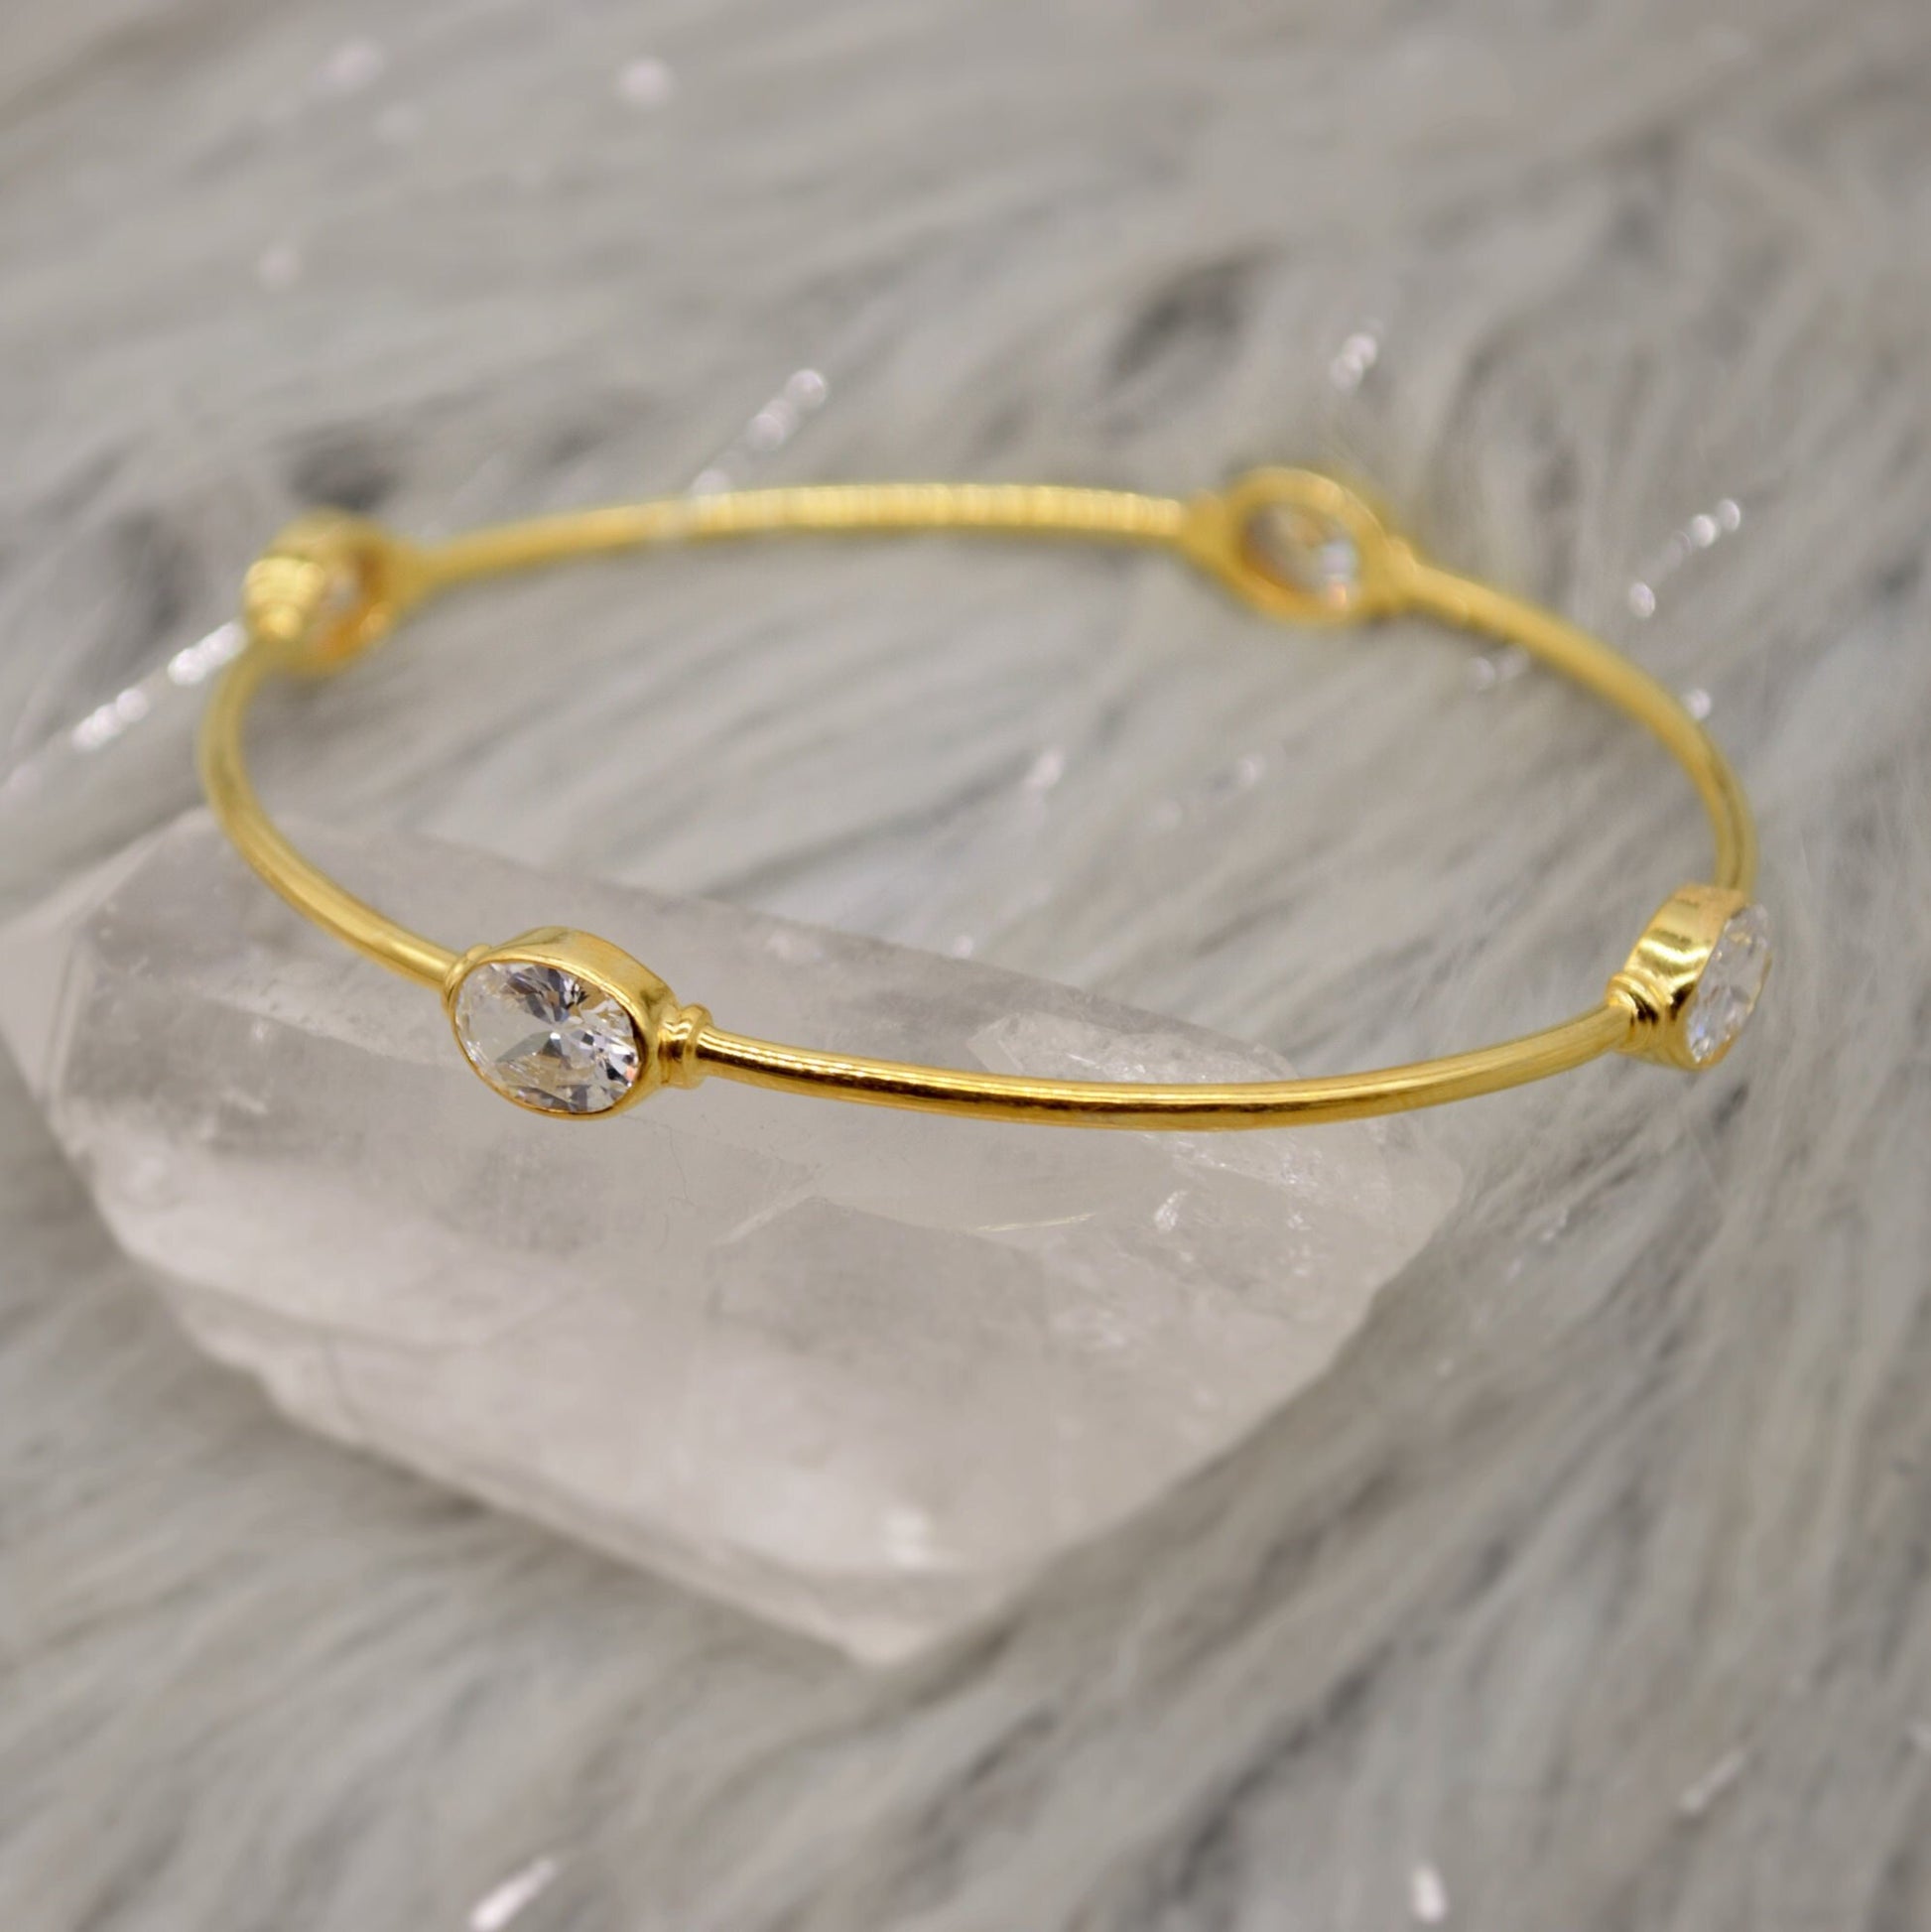 Cubic Zirconia Silver Bracelet, Gold Plated CZ Bangles For Women, Dainty Gemstone Bracelet, Birthday Gift For Her, Bridesmaid Gift